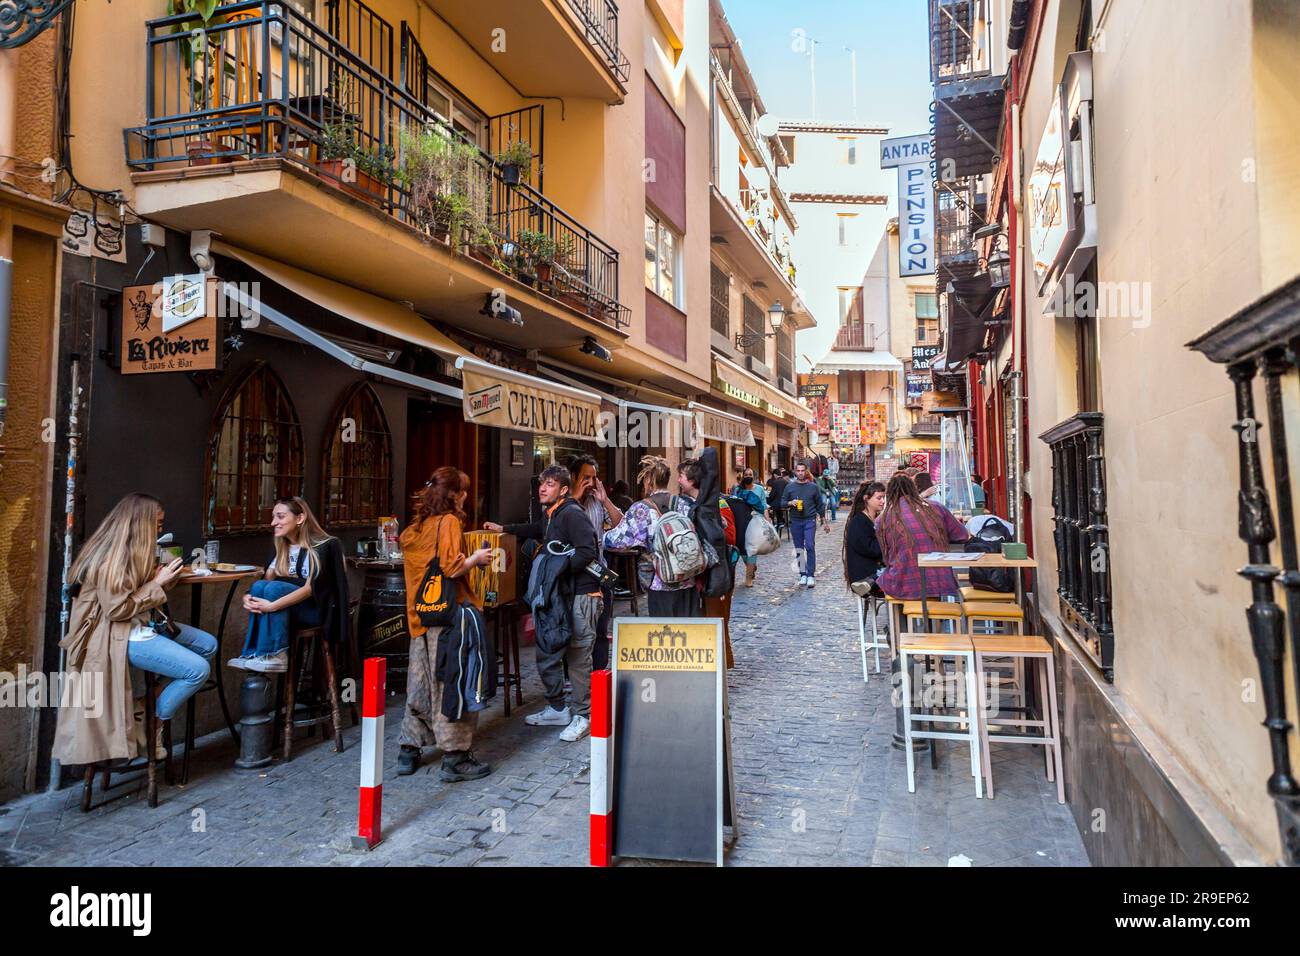 Granada, Spain - February 22, 2022: Generic architecture and street view with cafes and stores in the historical city of Granada in Andalusia, Spain. Stock Photo